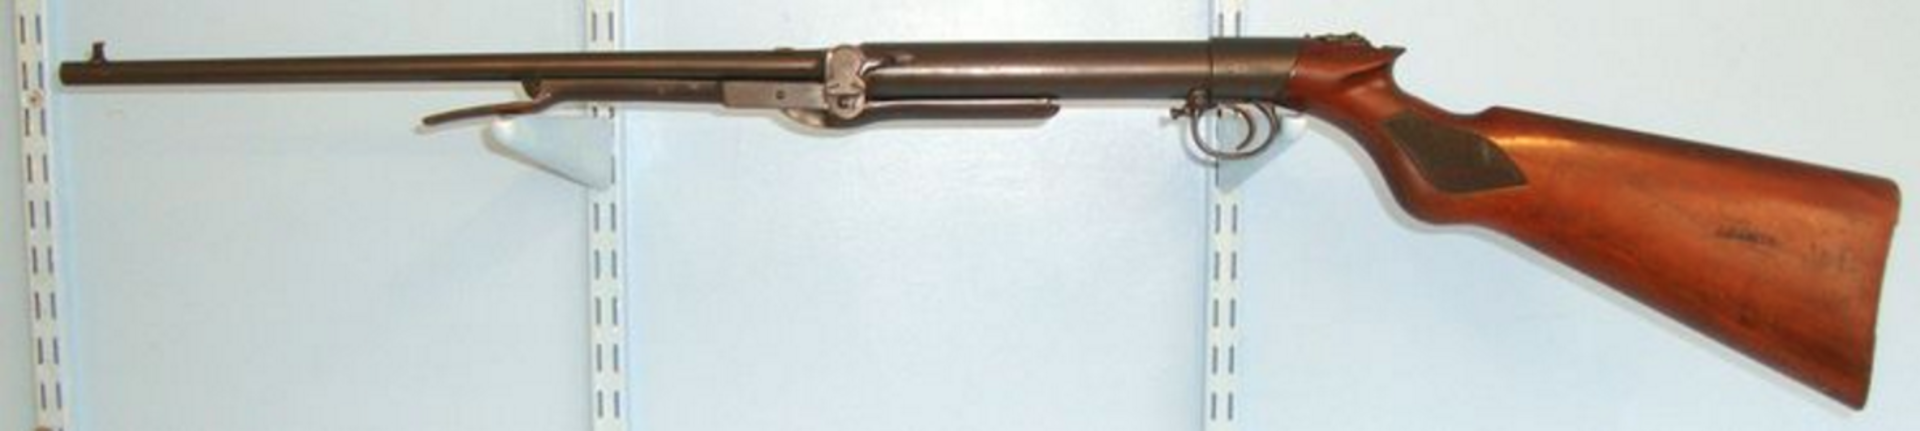 RARE, 1908, BSA Lincoln Jeffries Patent Improved Model B .177 Calibre Air Rifle - Image 3 of 3